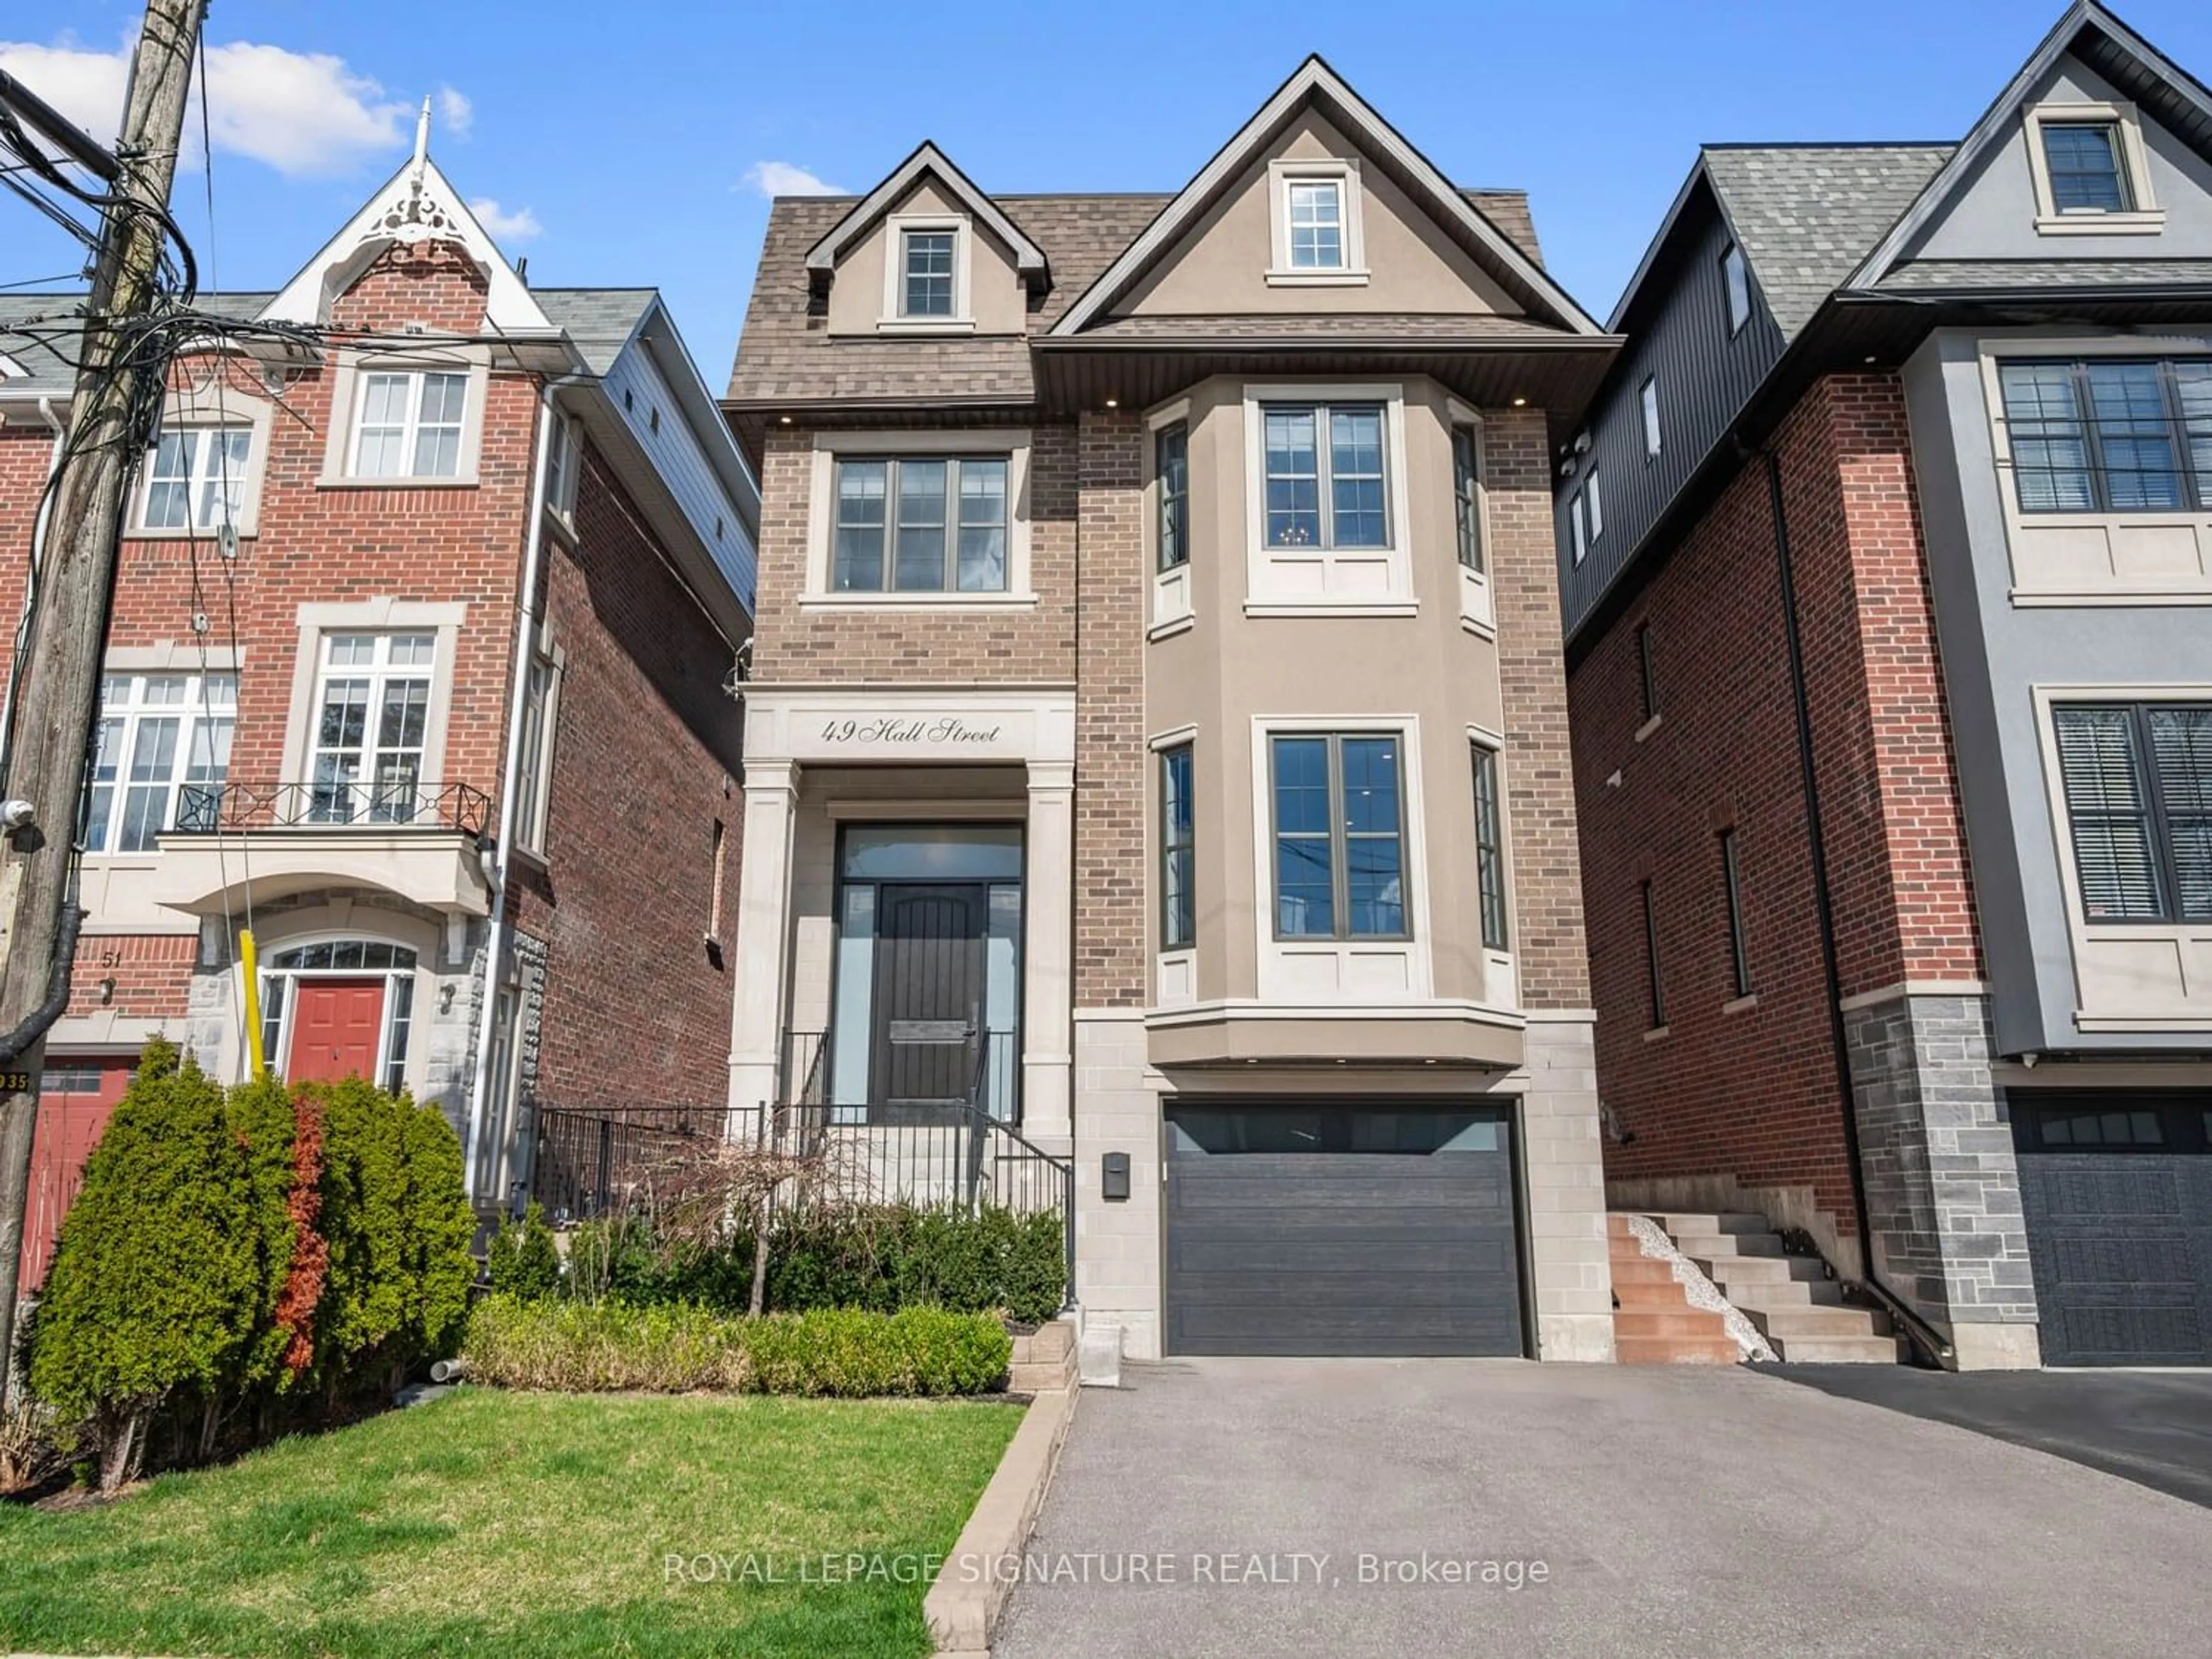 Home with brick exterior material for 49 Hall St, Richmond Hill Ontario L4C 4N7